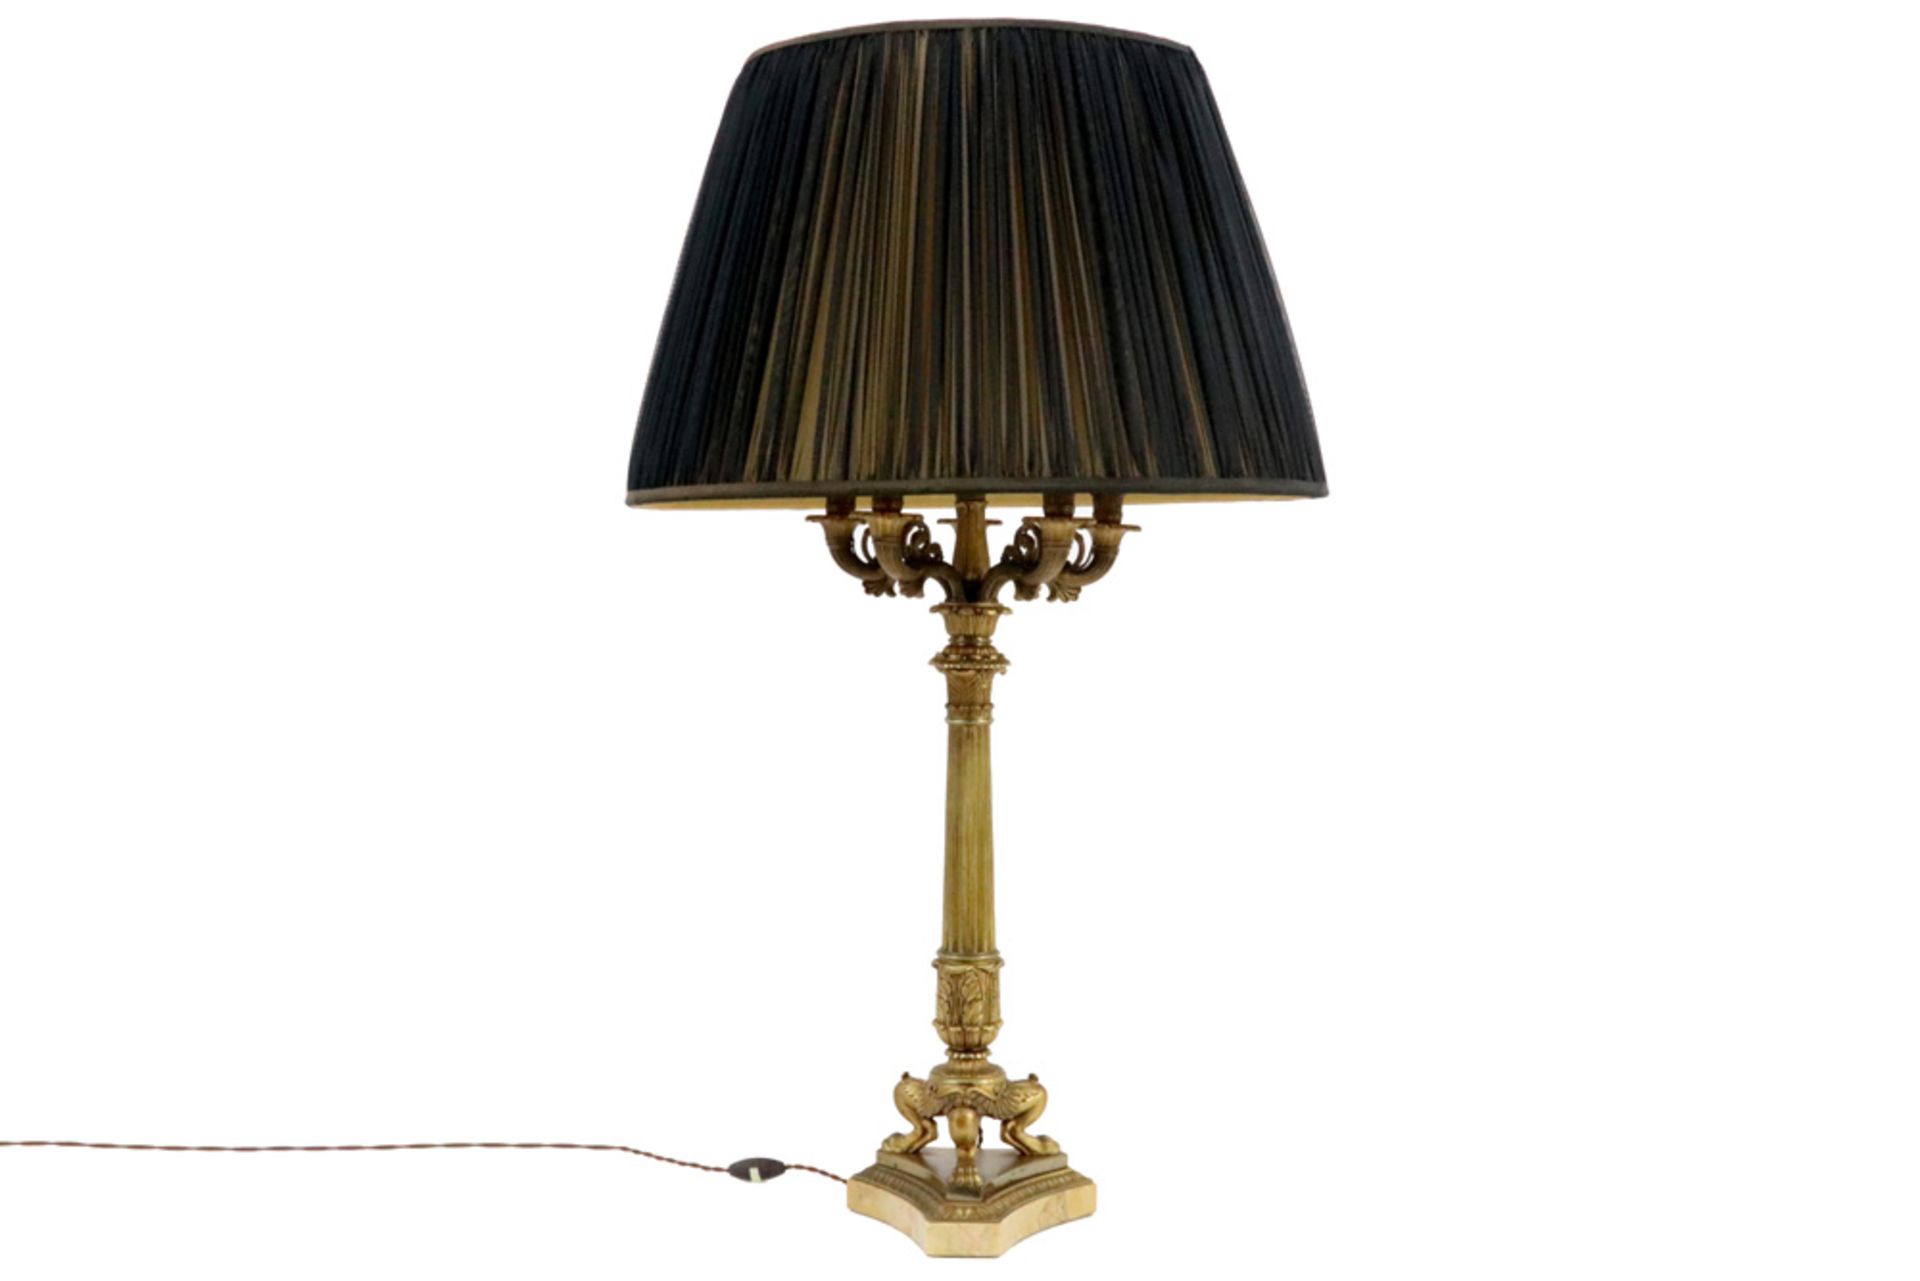 lamp with an 'antique' Empire style candelabra in gilded bronze on a marble base || Schemerlamp